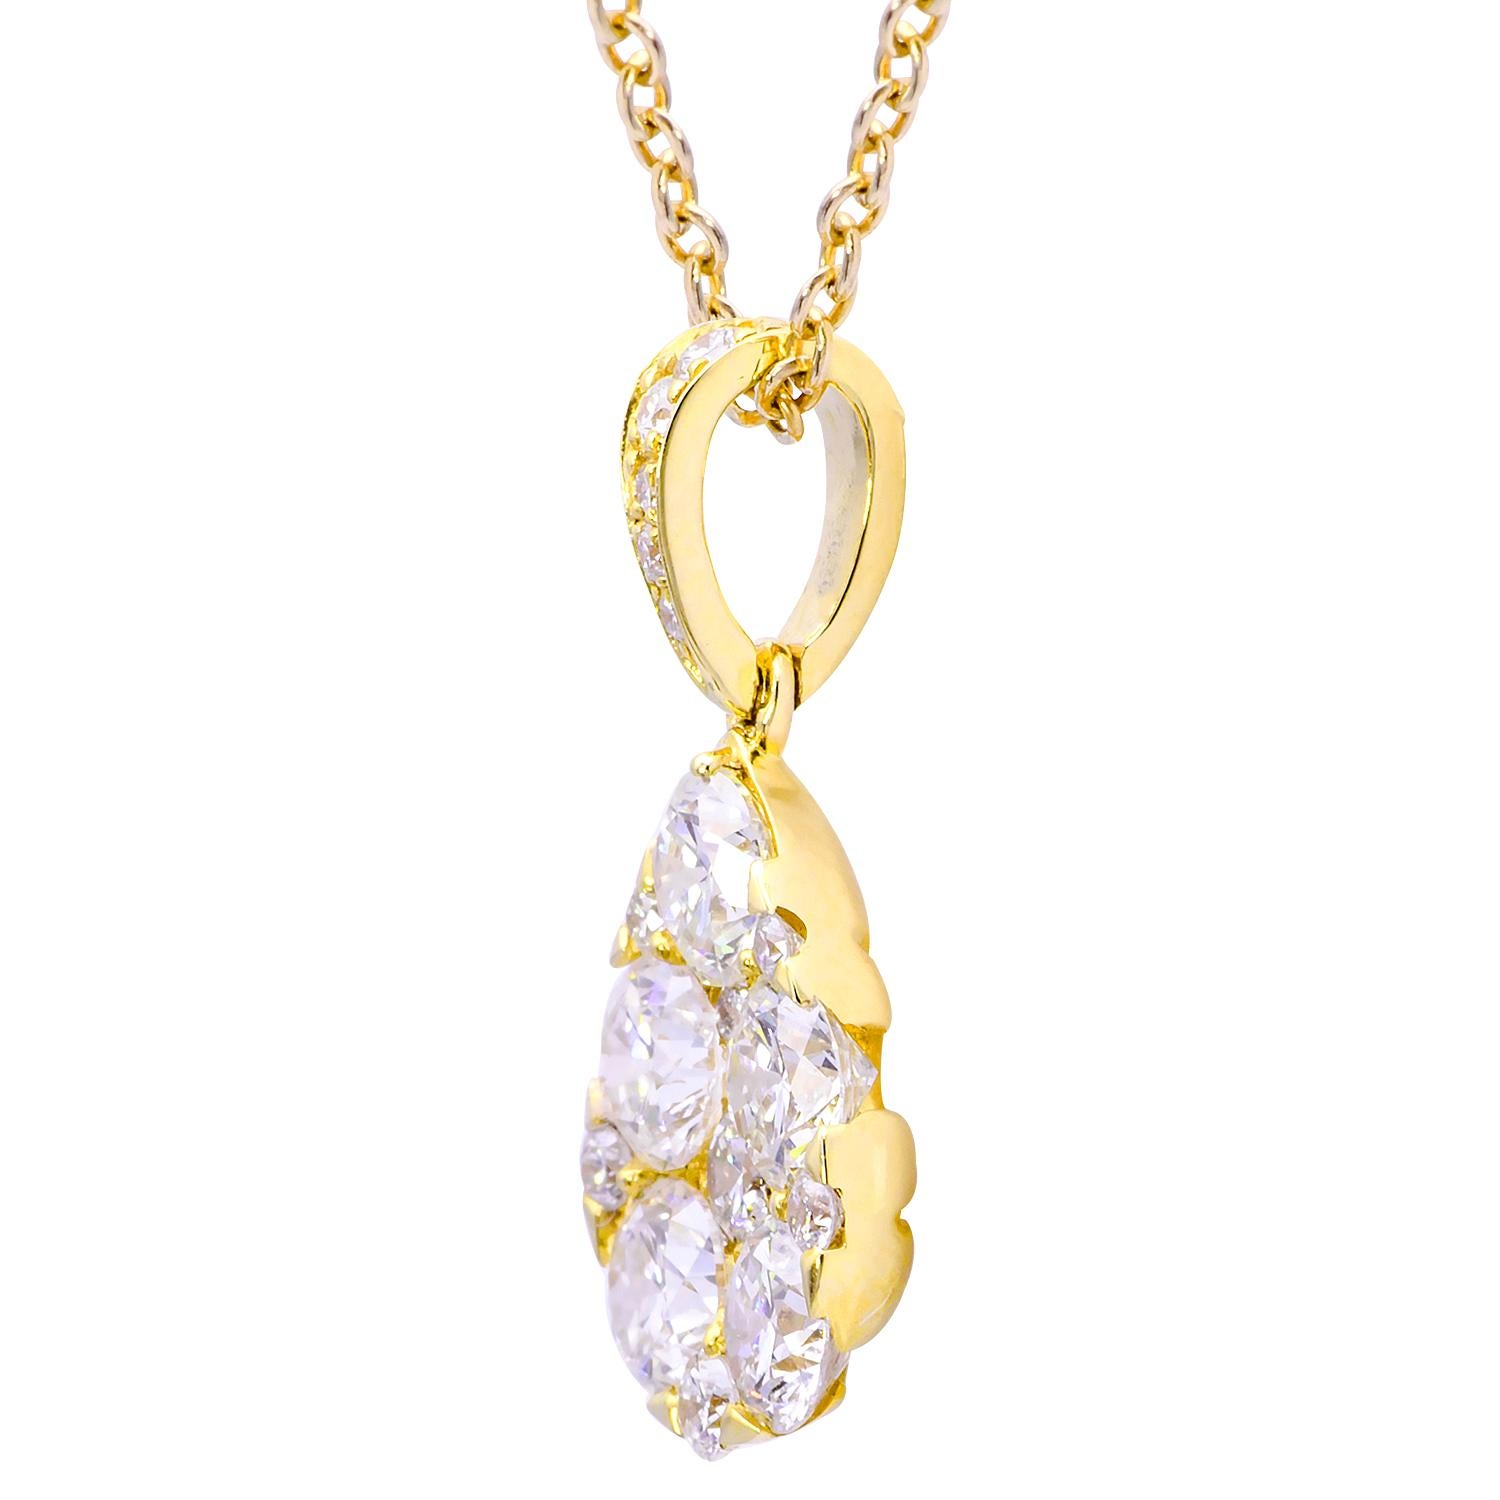 Classic and elegant are the first words that come to mind with this stunning necklace. Set in 1.2 grams of 18 karat yellow gold are 5 large diamonds surrounded by 12 smaller diamonds to make a lovely pearl-shaped cluster hanging from a